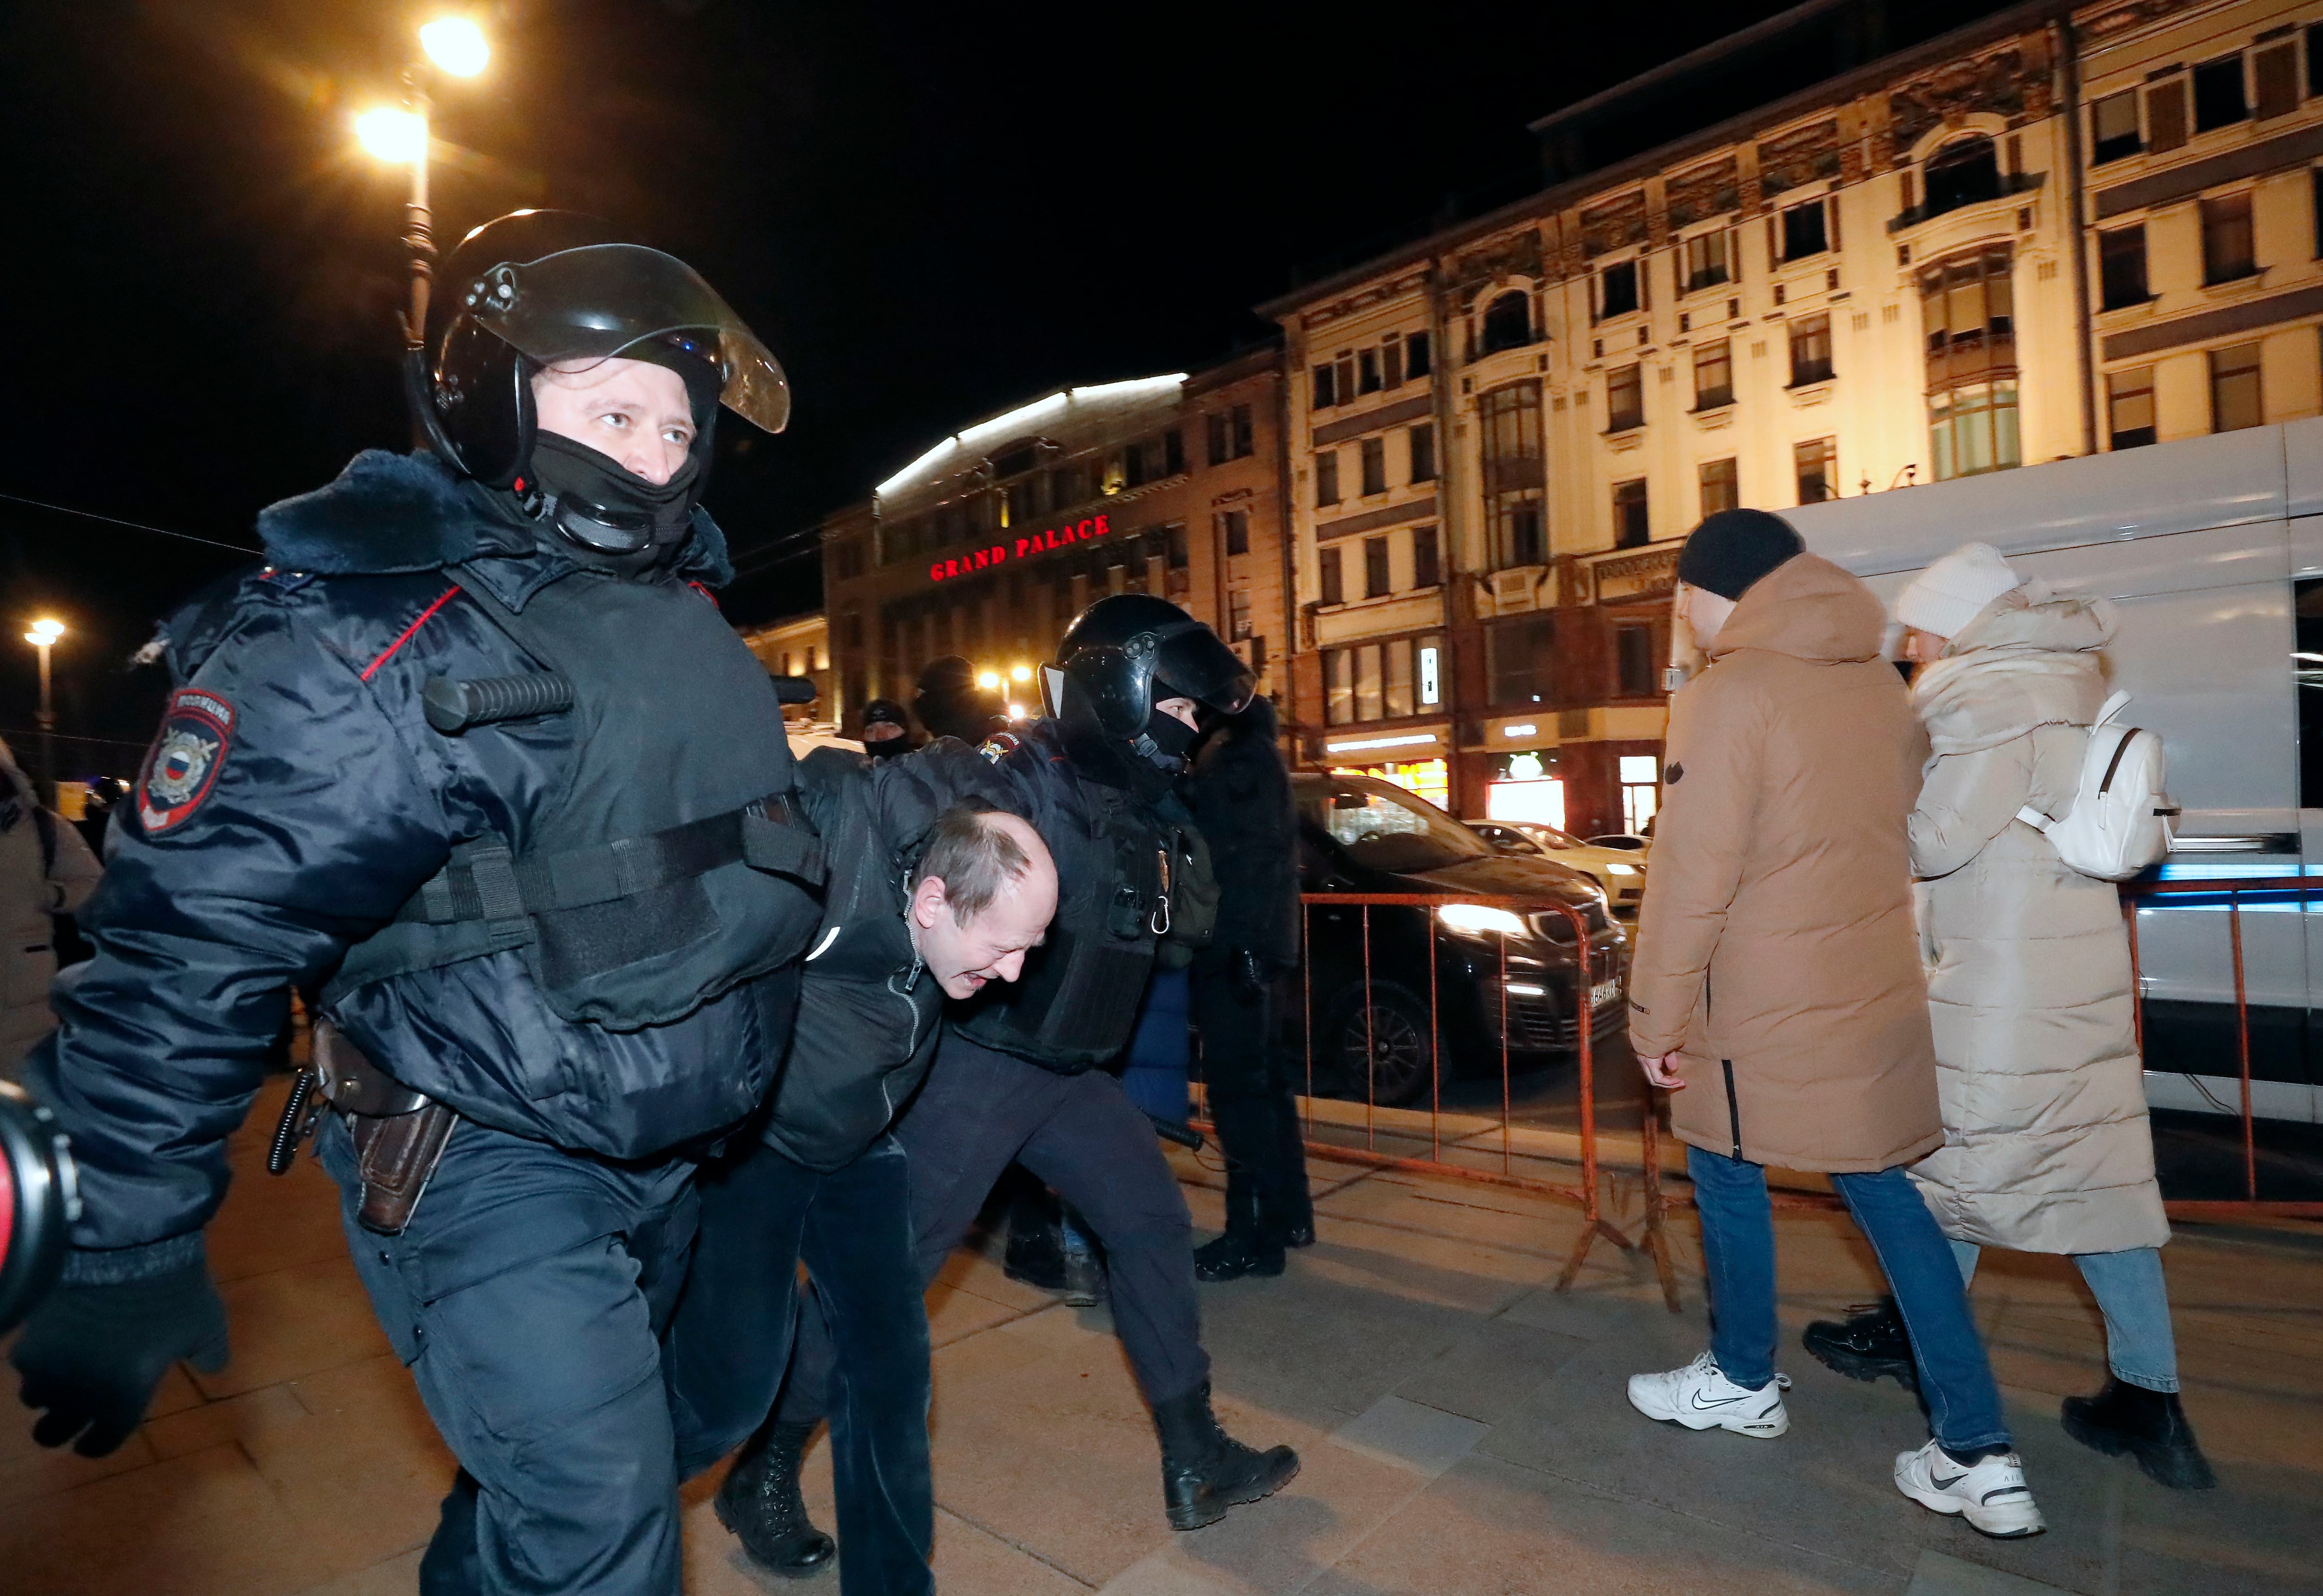 Russian police officers detain a protester during a demonstration against the entry of Russian troops into Ukraine in Saint Petersburg, Russia.  (Photo: EFE/EPA/ANATOLY MALTSEV).